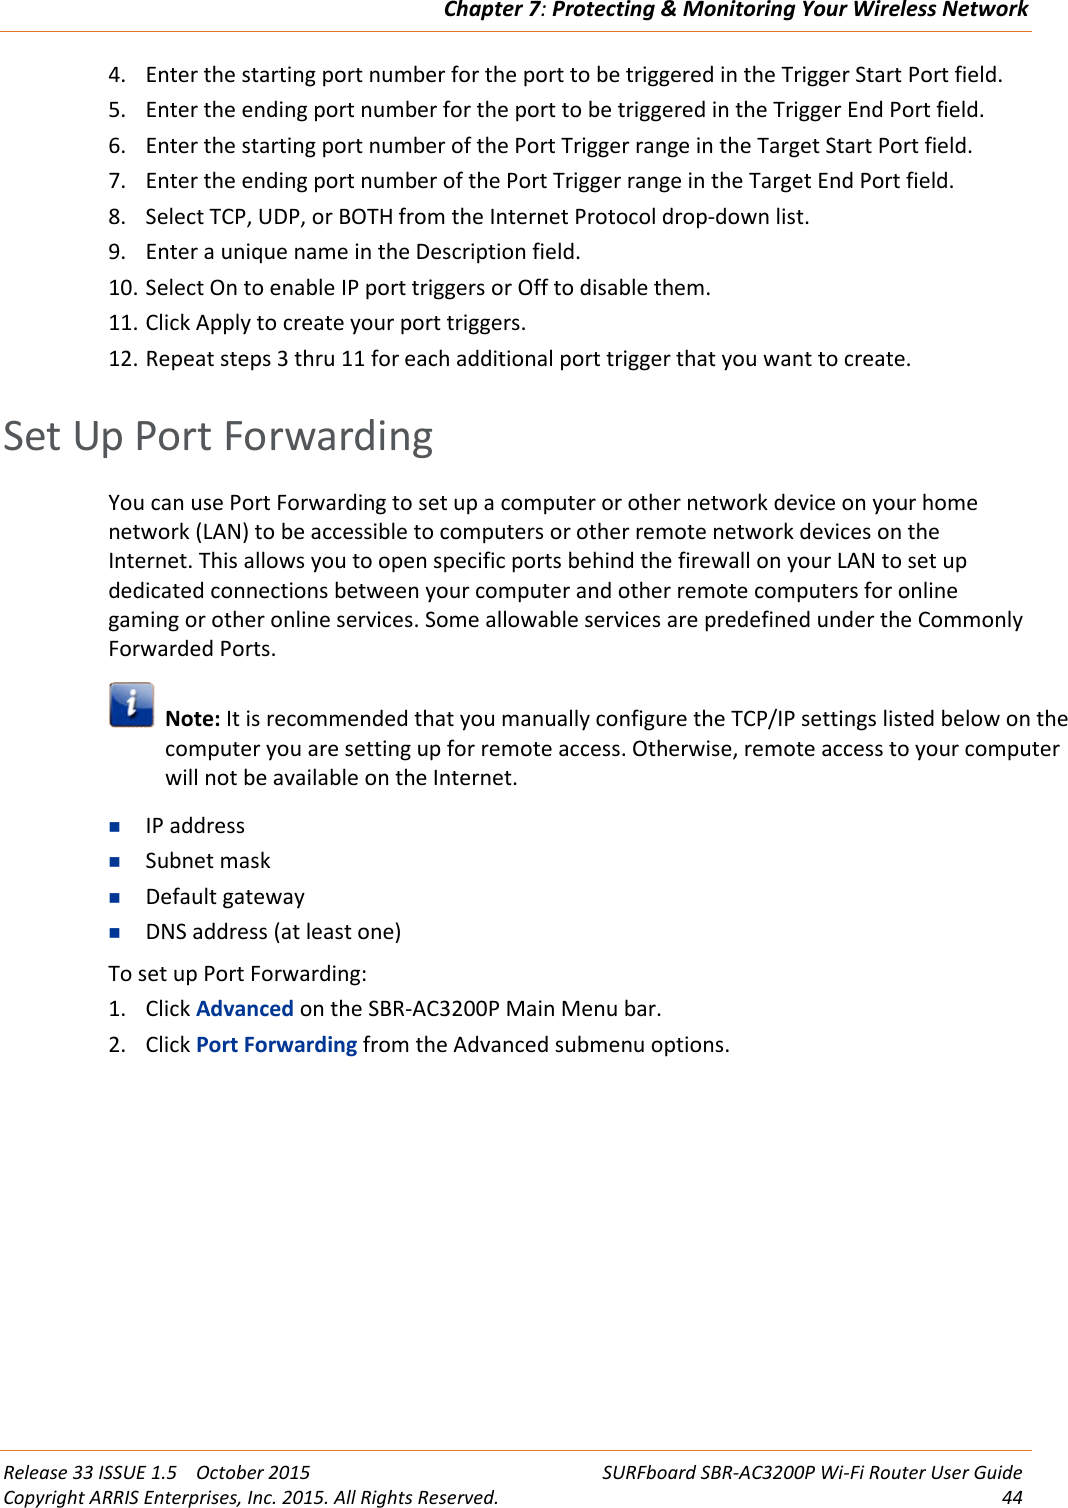 Chapter 7:Protecting &amp; Monitoring Your Wireless NetworkRelease 33 ISSUE 1.5 October 2015 SURFboard SBR-AC3200P Wi-Fi Router User GuideCopyright ARRIS Enterprises, Inc. 2015. All Rights Reserved. 444. Enter the starting port number for the port to be triggered in the Trigger Start Port field.5. Enter the ending port number for the port to be triggered in the Trigger End Port field.6. Enter the starting port number of the Port Trigger range in the Target Start Port field.7. Enter the ending port number of the Port Trigger range in the Target End Port field.8. Select TCP, UDP, or BOTH from the Internet Protocol drop-down list.9. Enter a unique name in the Description field.10. Select On to enable IP port triggers or Off to disable them.11. Click Apply to create your port triggers.12. Repeat steps 3 thru 11 for each additional port trigger that you want to create.Set Up Port ForwardingYou can use Port Forwarding to set up a computer or other network device on your homenetwork (LAN) to be accessible to computers or other remote network devices on theInternet. This allows you to open specific ports behind the firewall on your LAN to set updedicated connections between your computer and other remote computers for onlinegaming or other online services. Some allowable services are predefined under the CommonlyForwarded Ports.Note: It is recommended that you manually configure the TCP/IP settings listed below on thecomputer you are setting up for remote access. Otherwise, remote access to your computerwill not be available on the Internet.IP addressSubnet maskDefault gatewayDNS address (at least one)To set up Port Forwarding:1. Click Advanced on the SBR-AC3200P Main Menu bar.2. Click Port Forwarding from the Advanced submenu options.